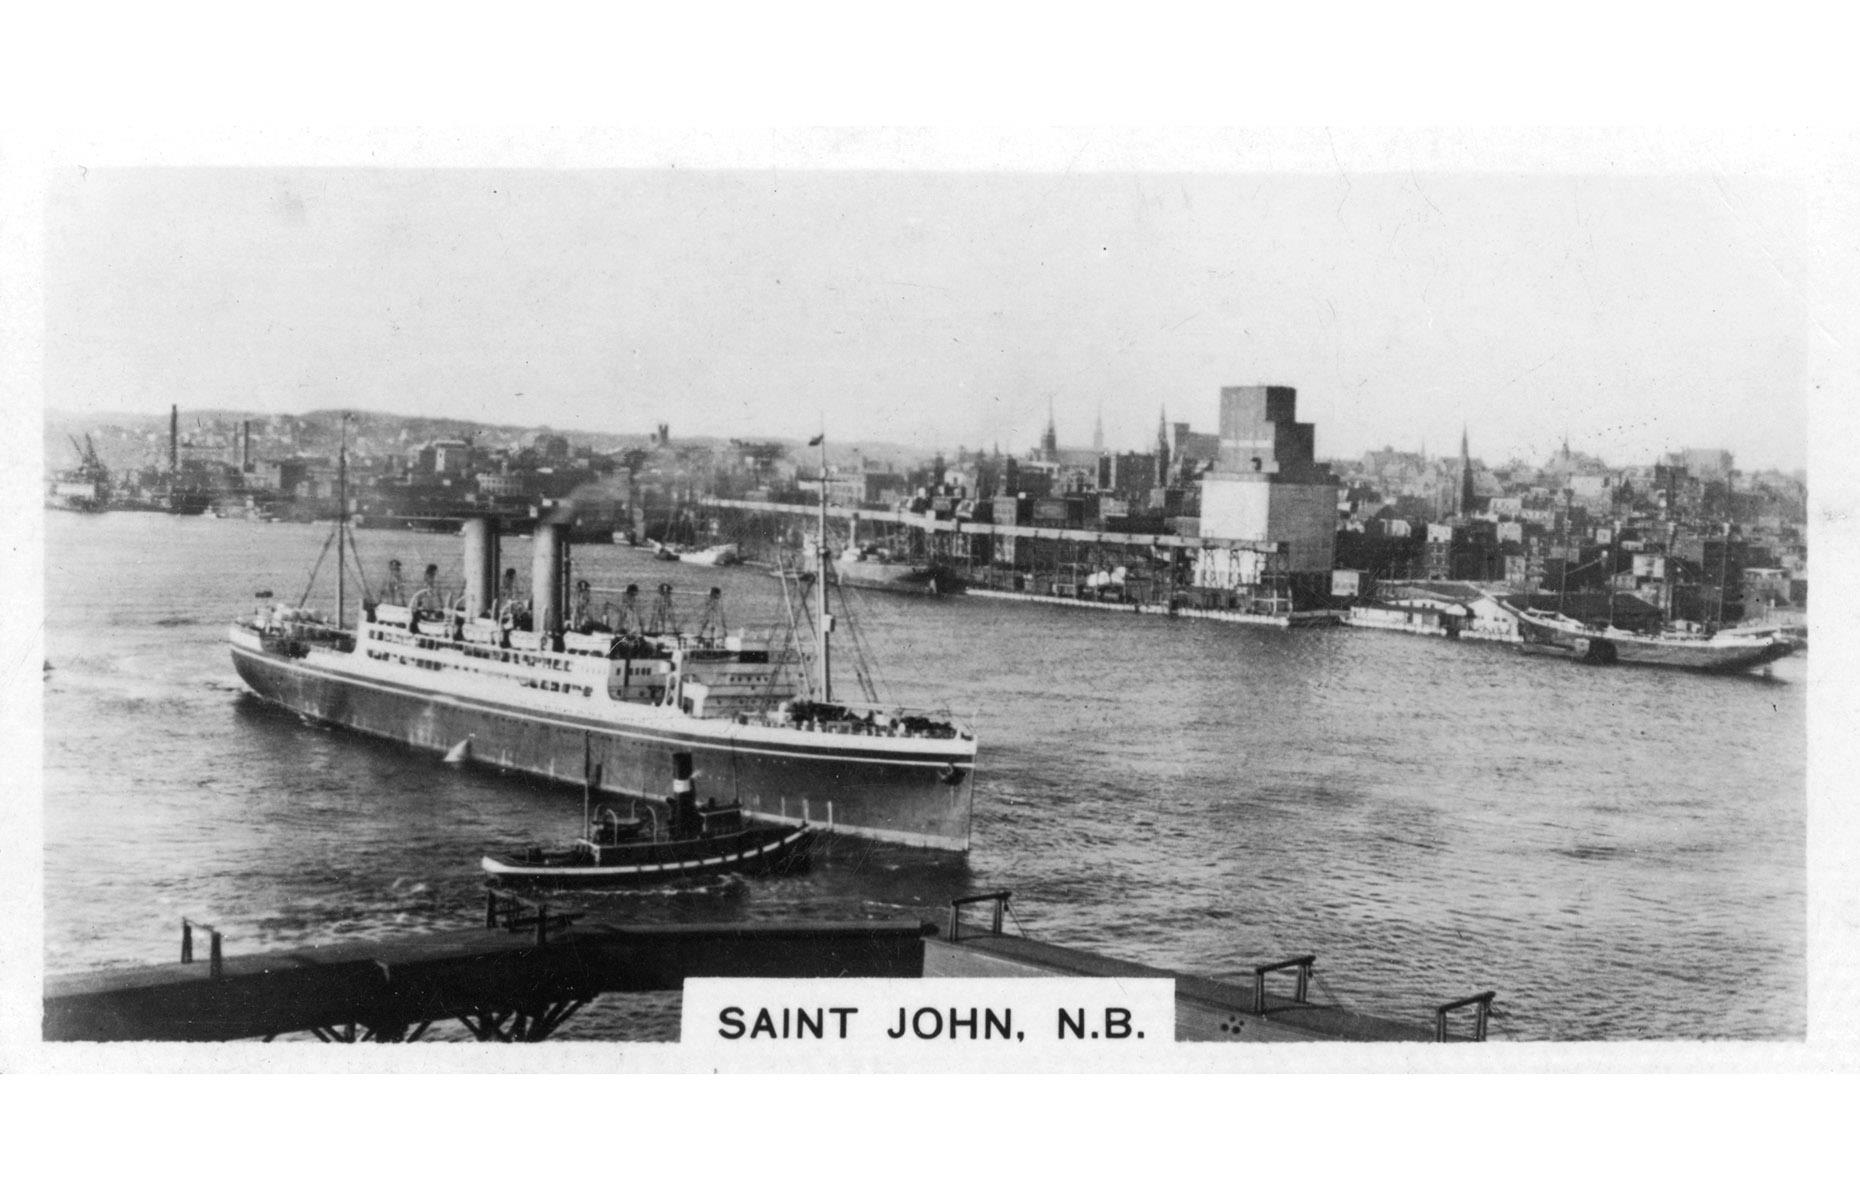 <p>Located on the Bay of Fundy, Saint John was Canada’s first incorporated city and has always thrived off its maritime location. Served by the highest tides on Earth and a year-round ice-free harbor, the city's waterfront was blessed with natural advantages. Before the days of plane travel, Port Saint John was a vital point of entry for immigrants into Canada, and had emerged as the largest shipbuilding city in British North America by the early 19th century. This image from the 1920s shows Port Saint John in all its early industrial glory.</p>